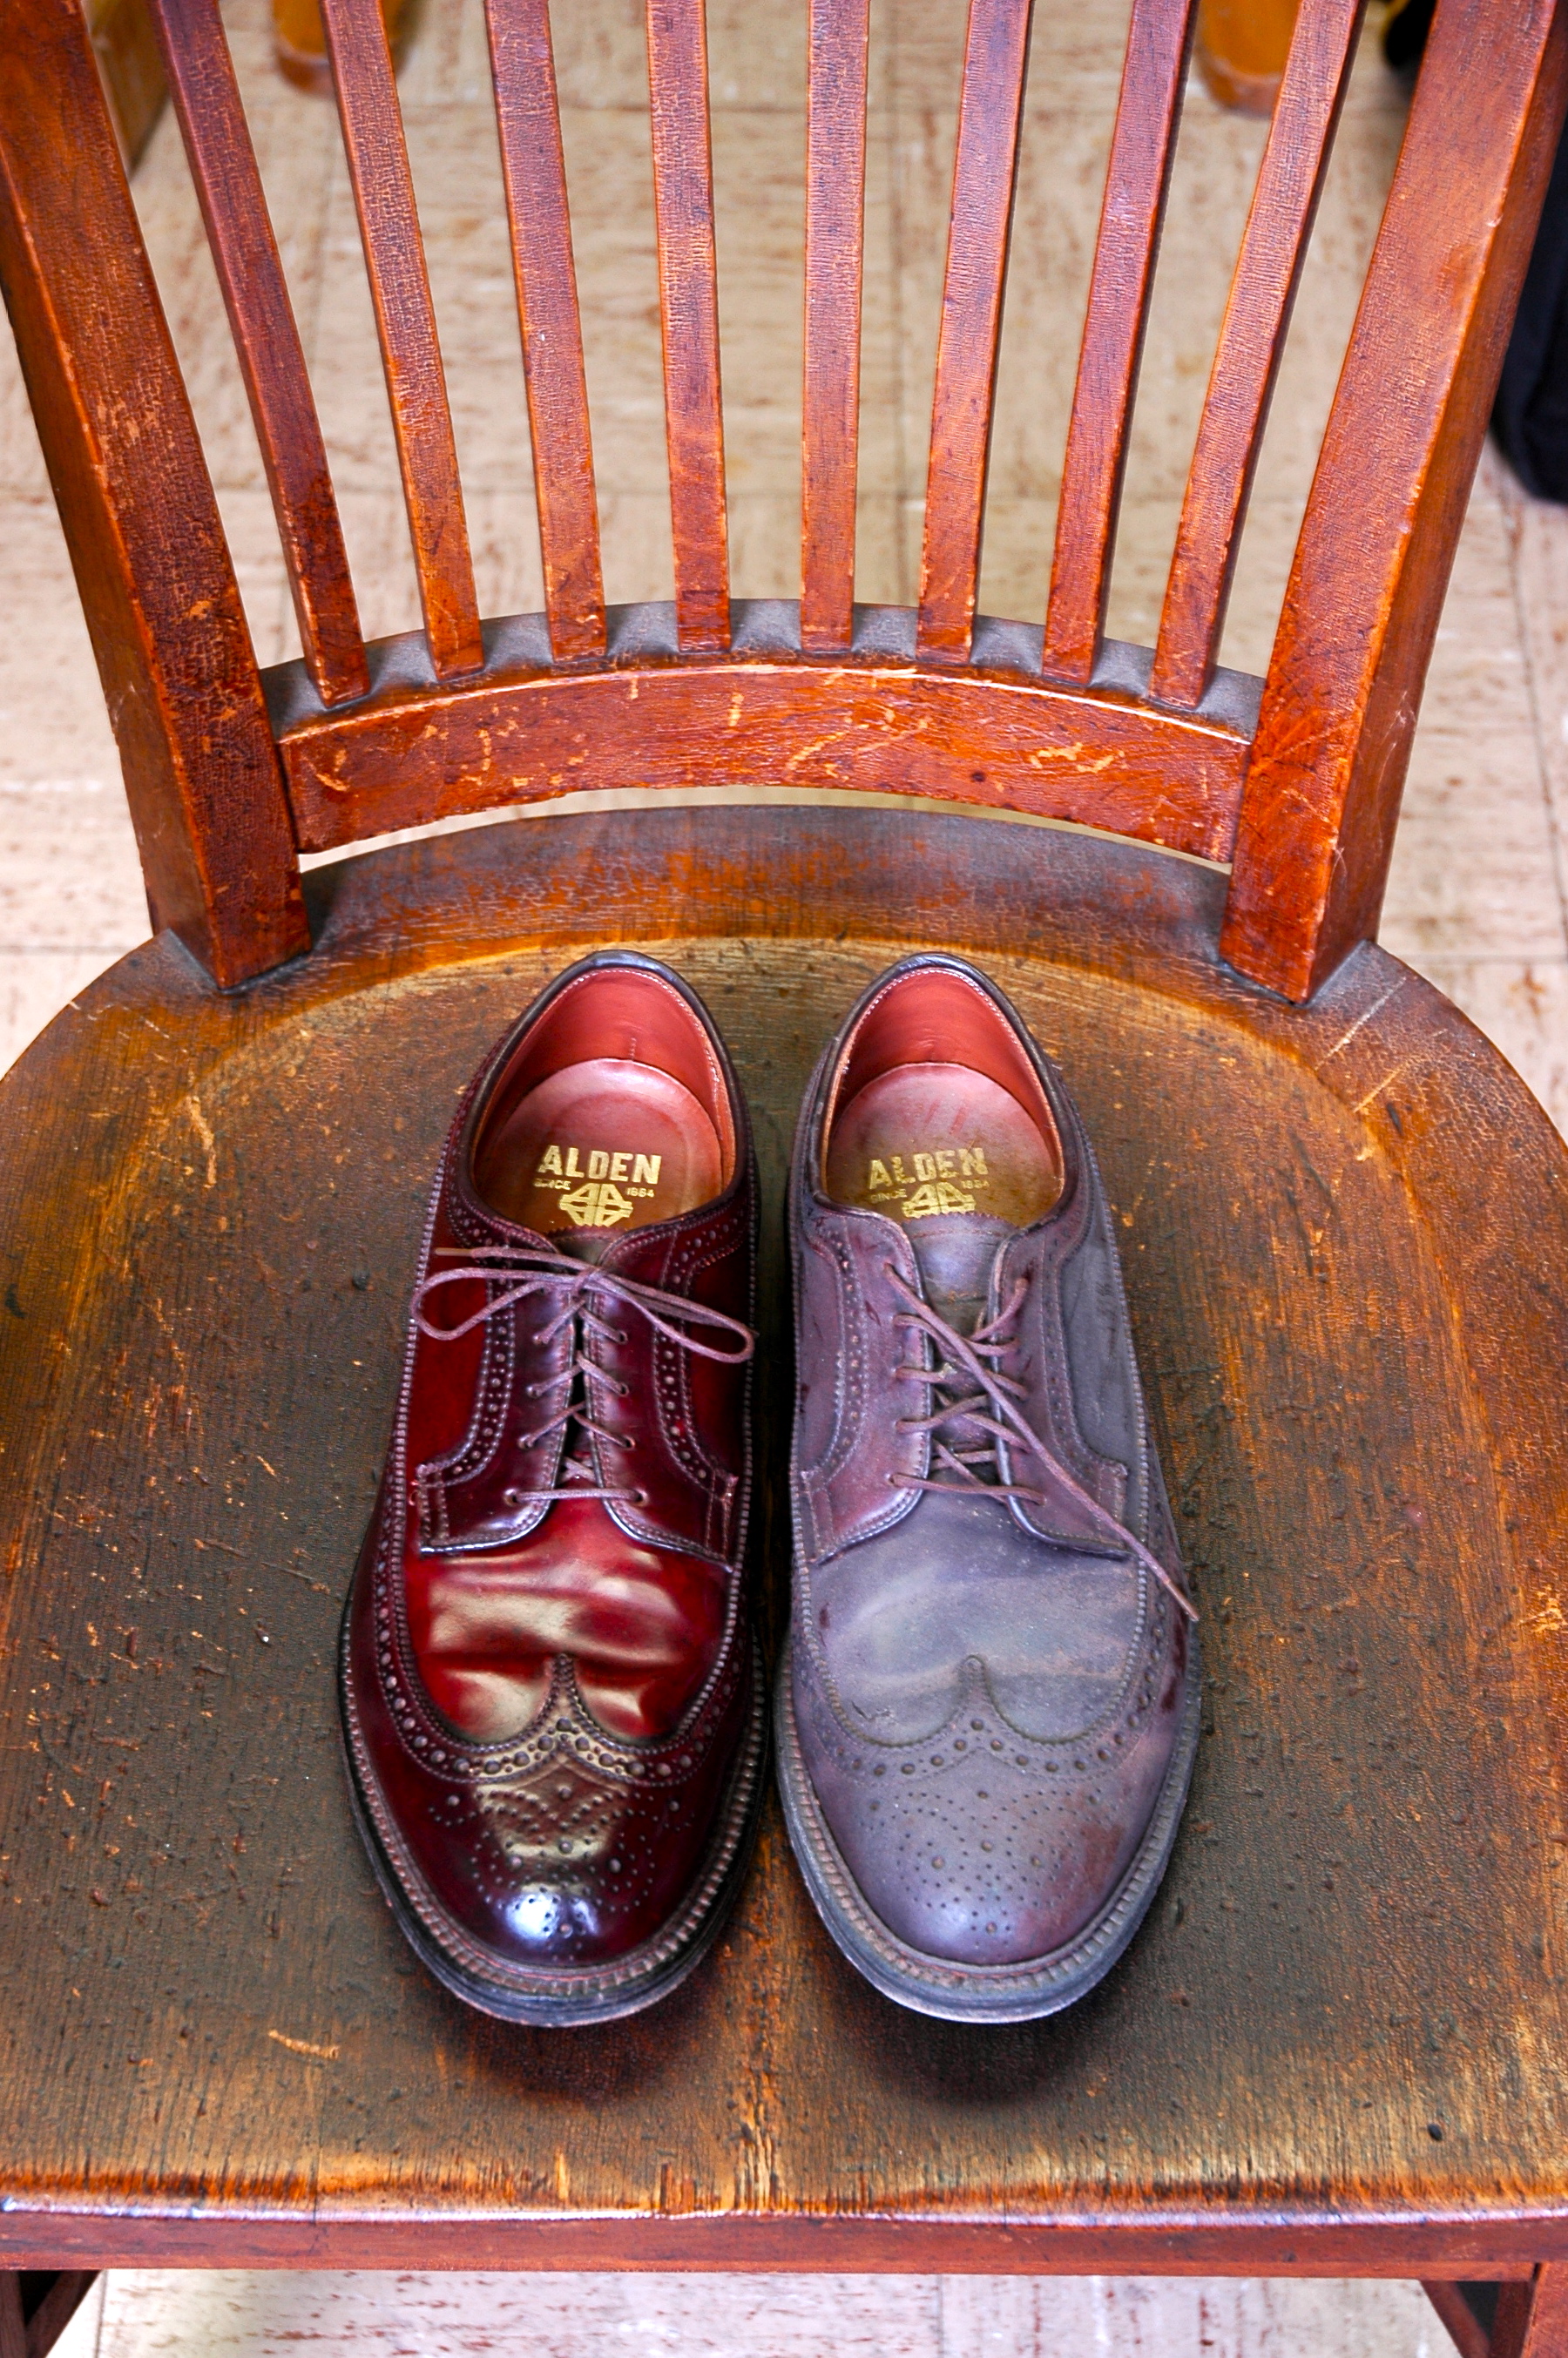 pair of Alden leather shoes on a wooden chair